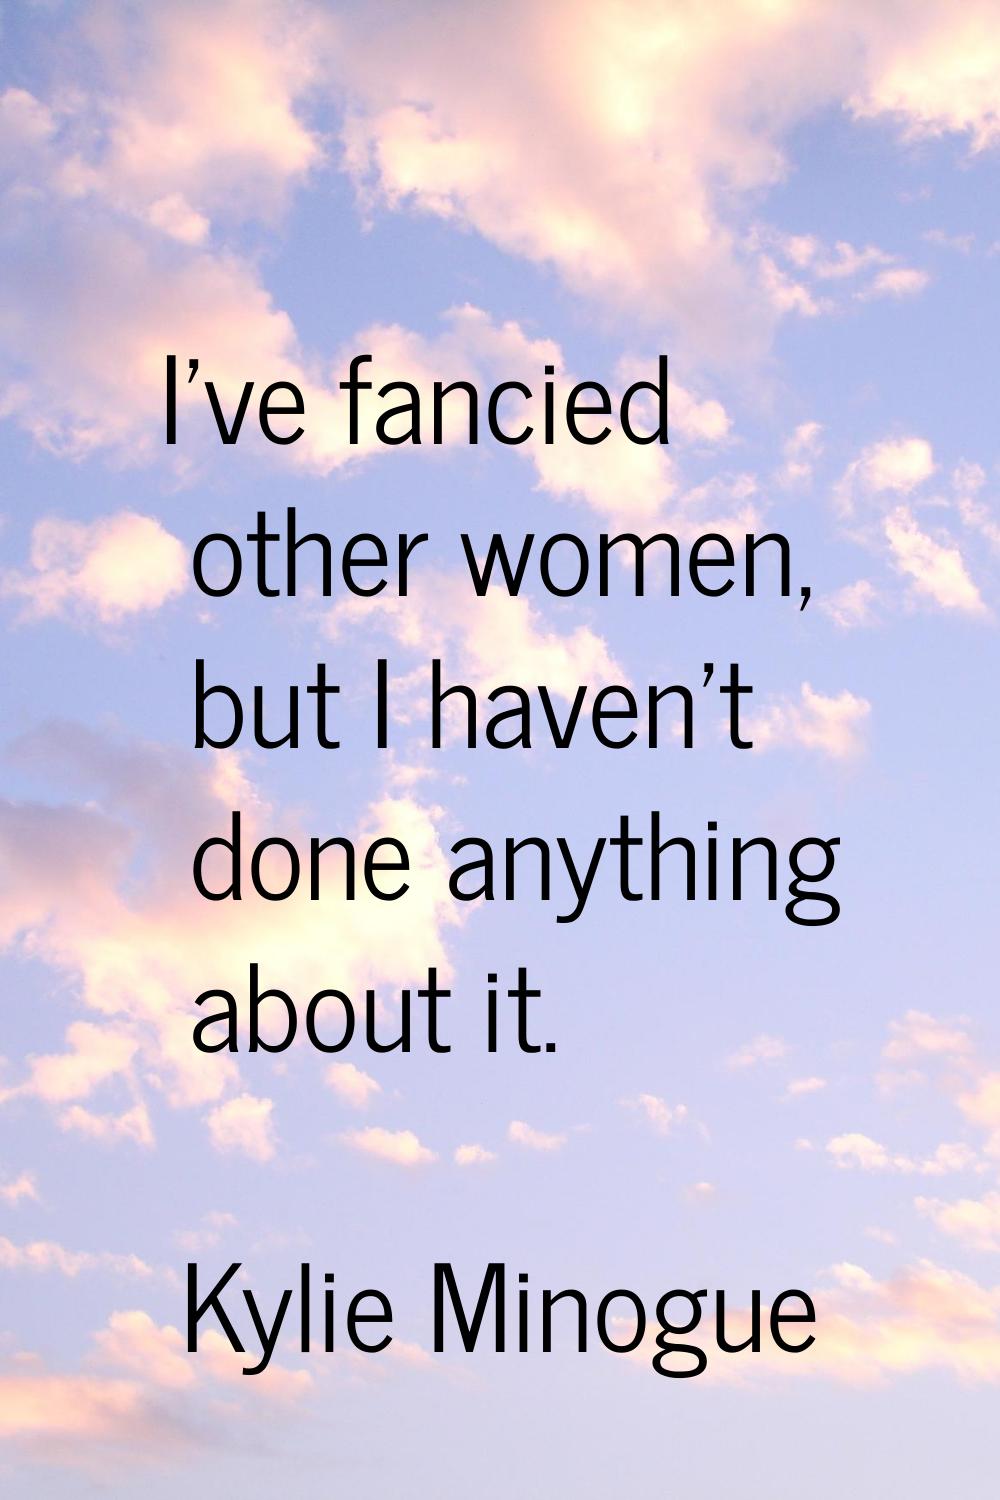 I've fancied other women, but I haven't done anything about it.